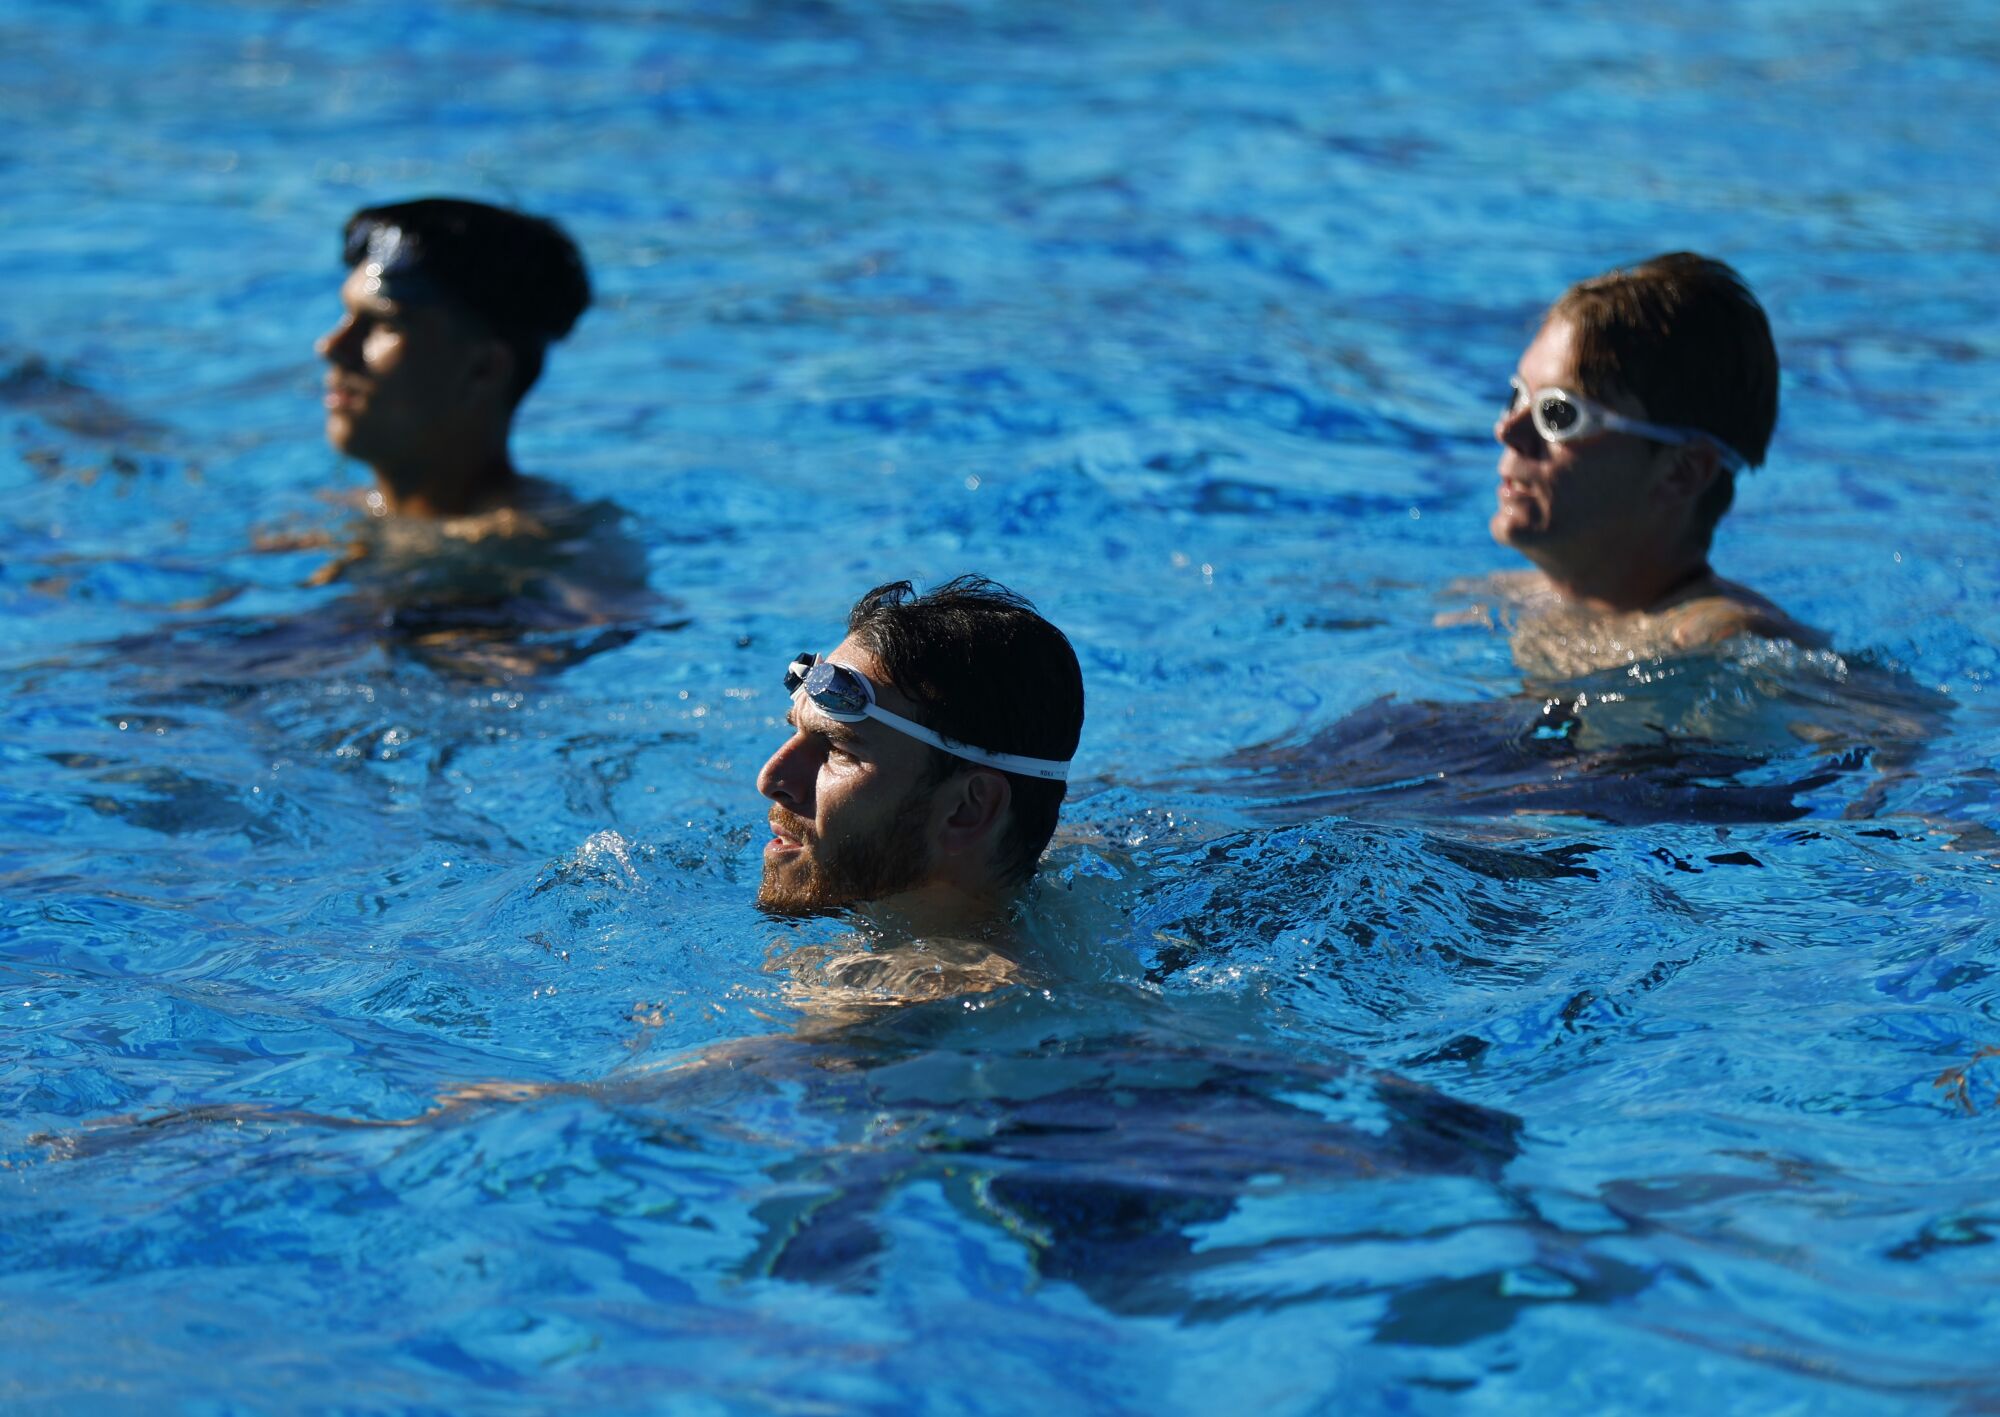 Joe Musgrove and teammates listened to instructions during underwater training in January.